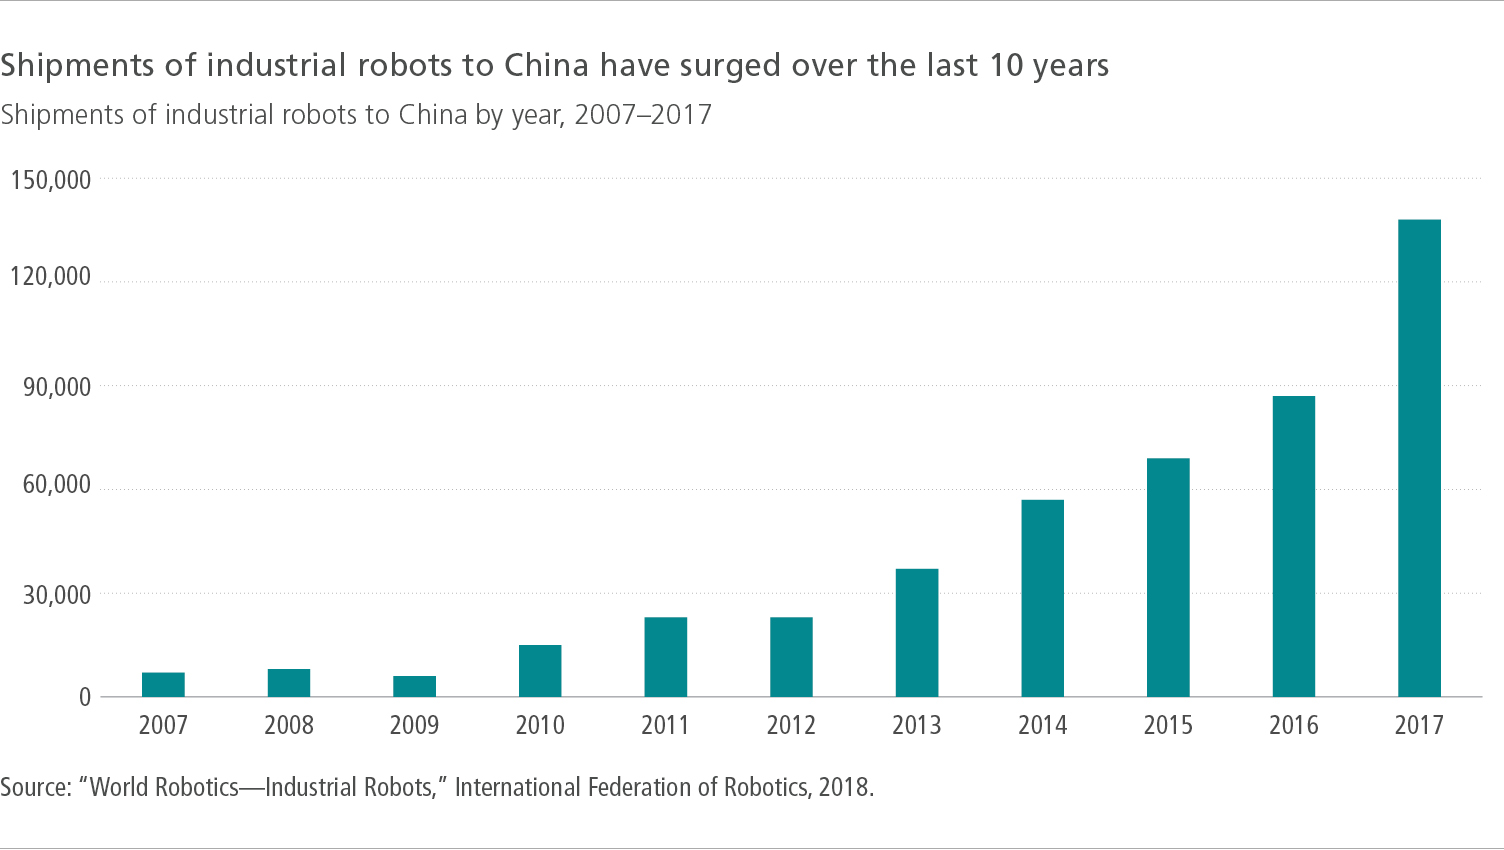 Shipments of industrial robots to China have surged over the last 10 years